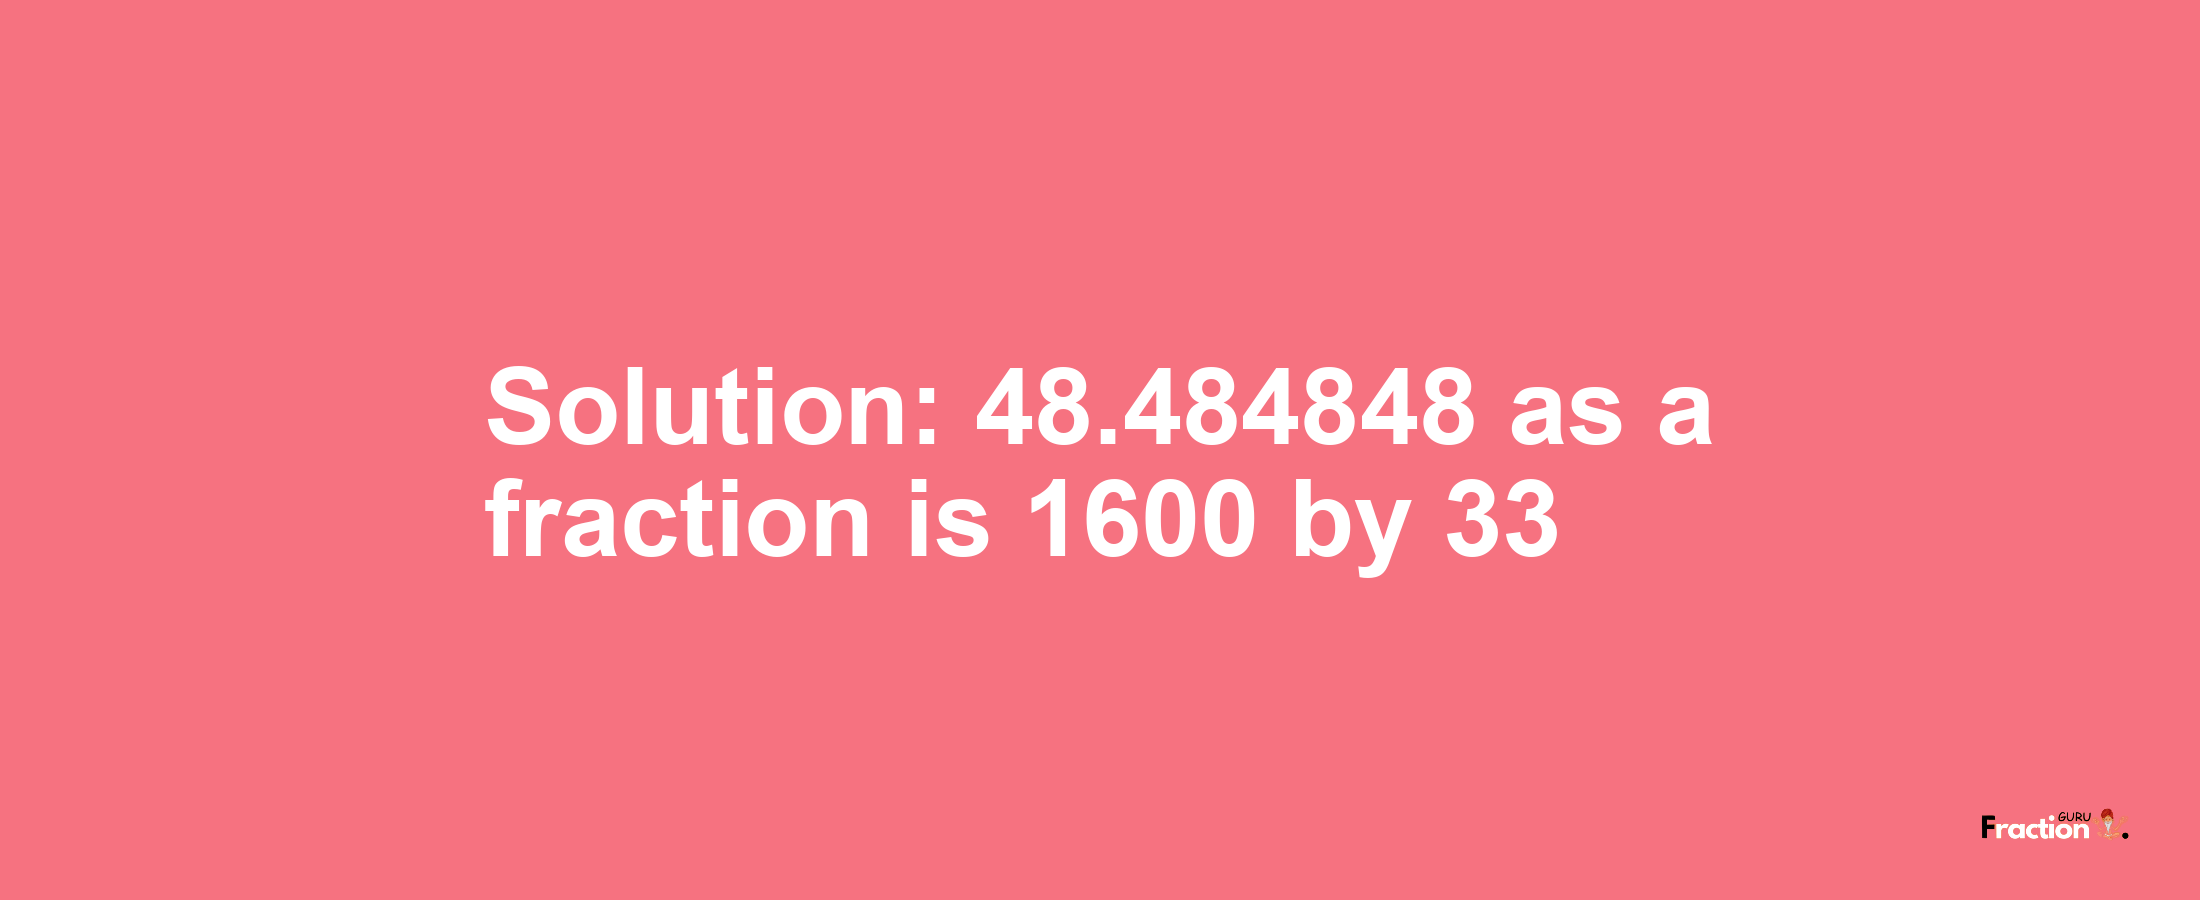 Solution:48.484848 as a fraction is 1600/33